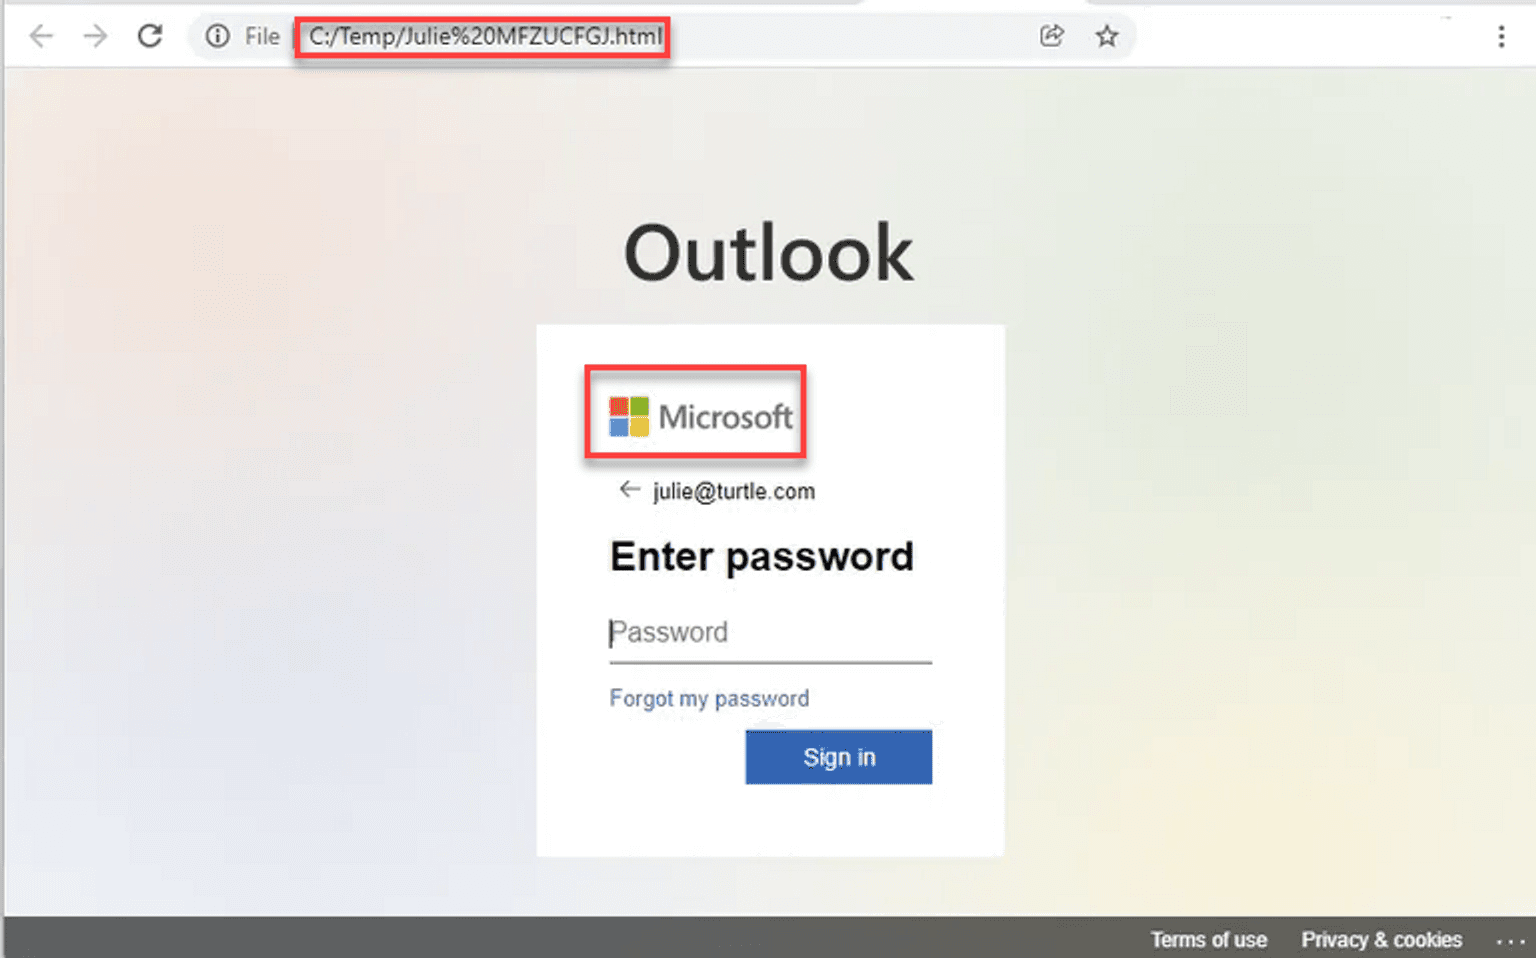 Example of a credential phishing page that emulates a Microsoft login page